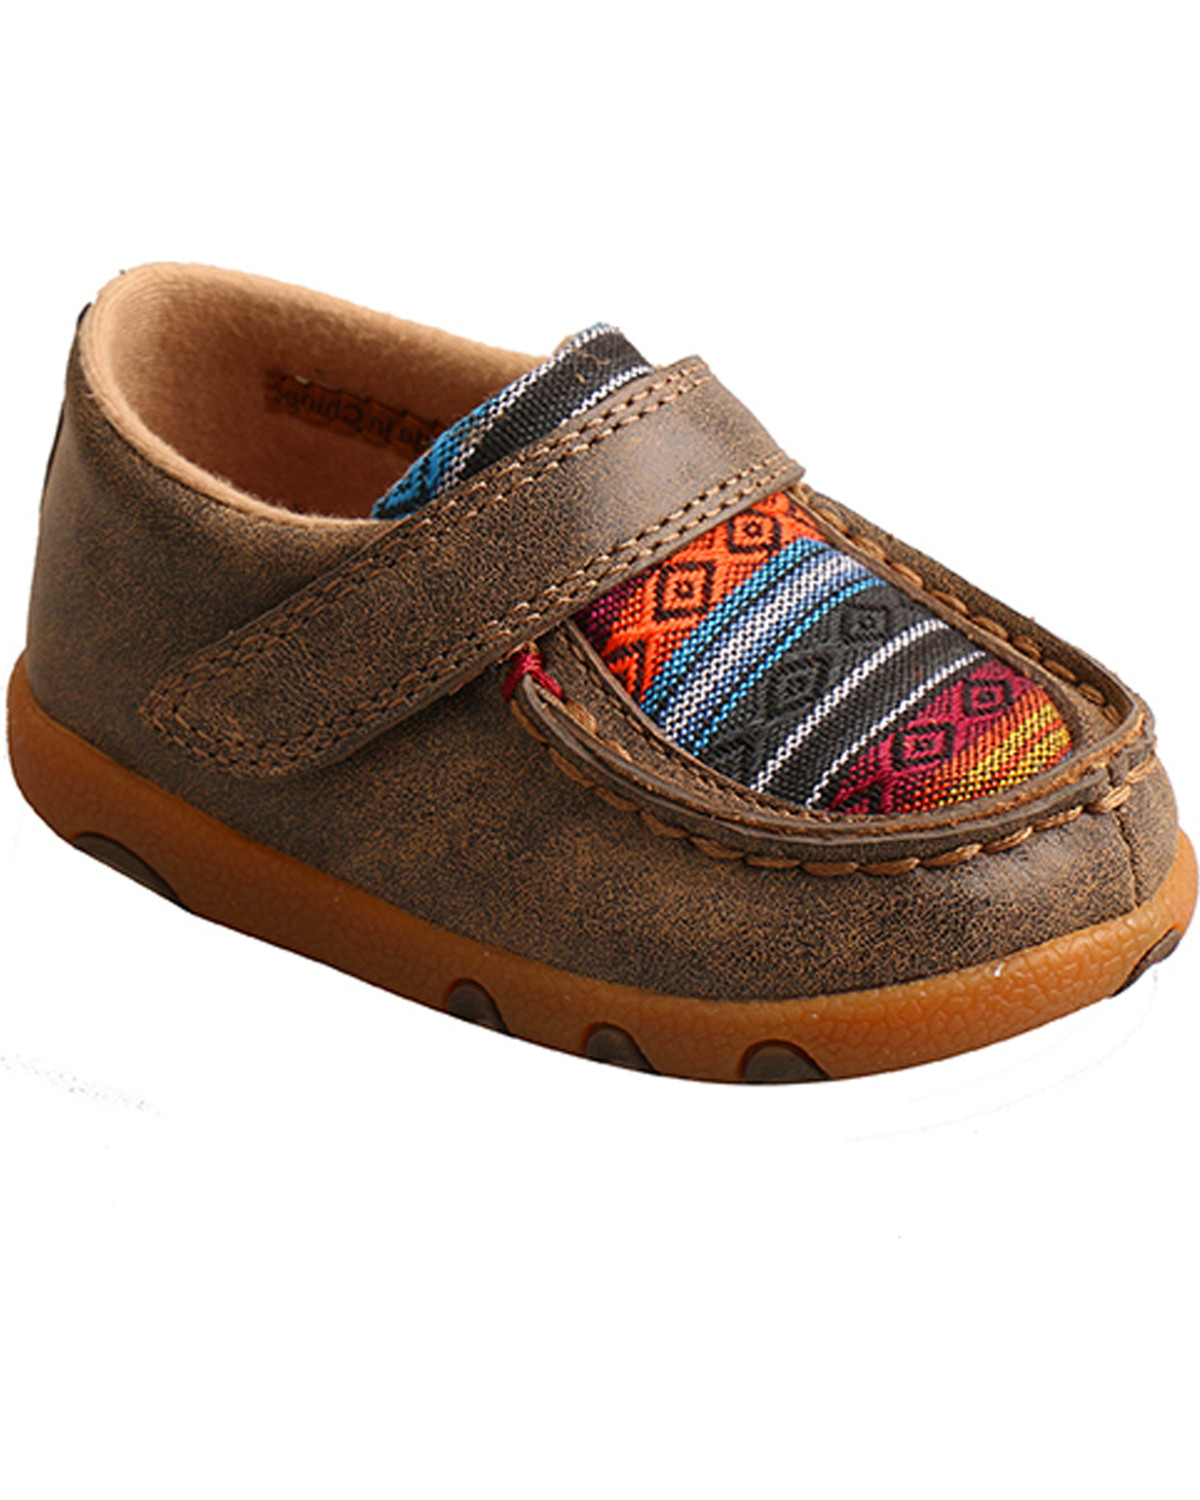 Twisted X Toddler Boys' Serape Canvas Driving Shoes - Moc Toe